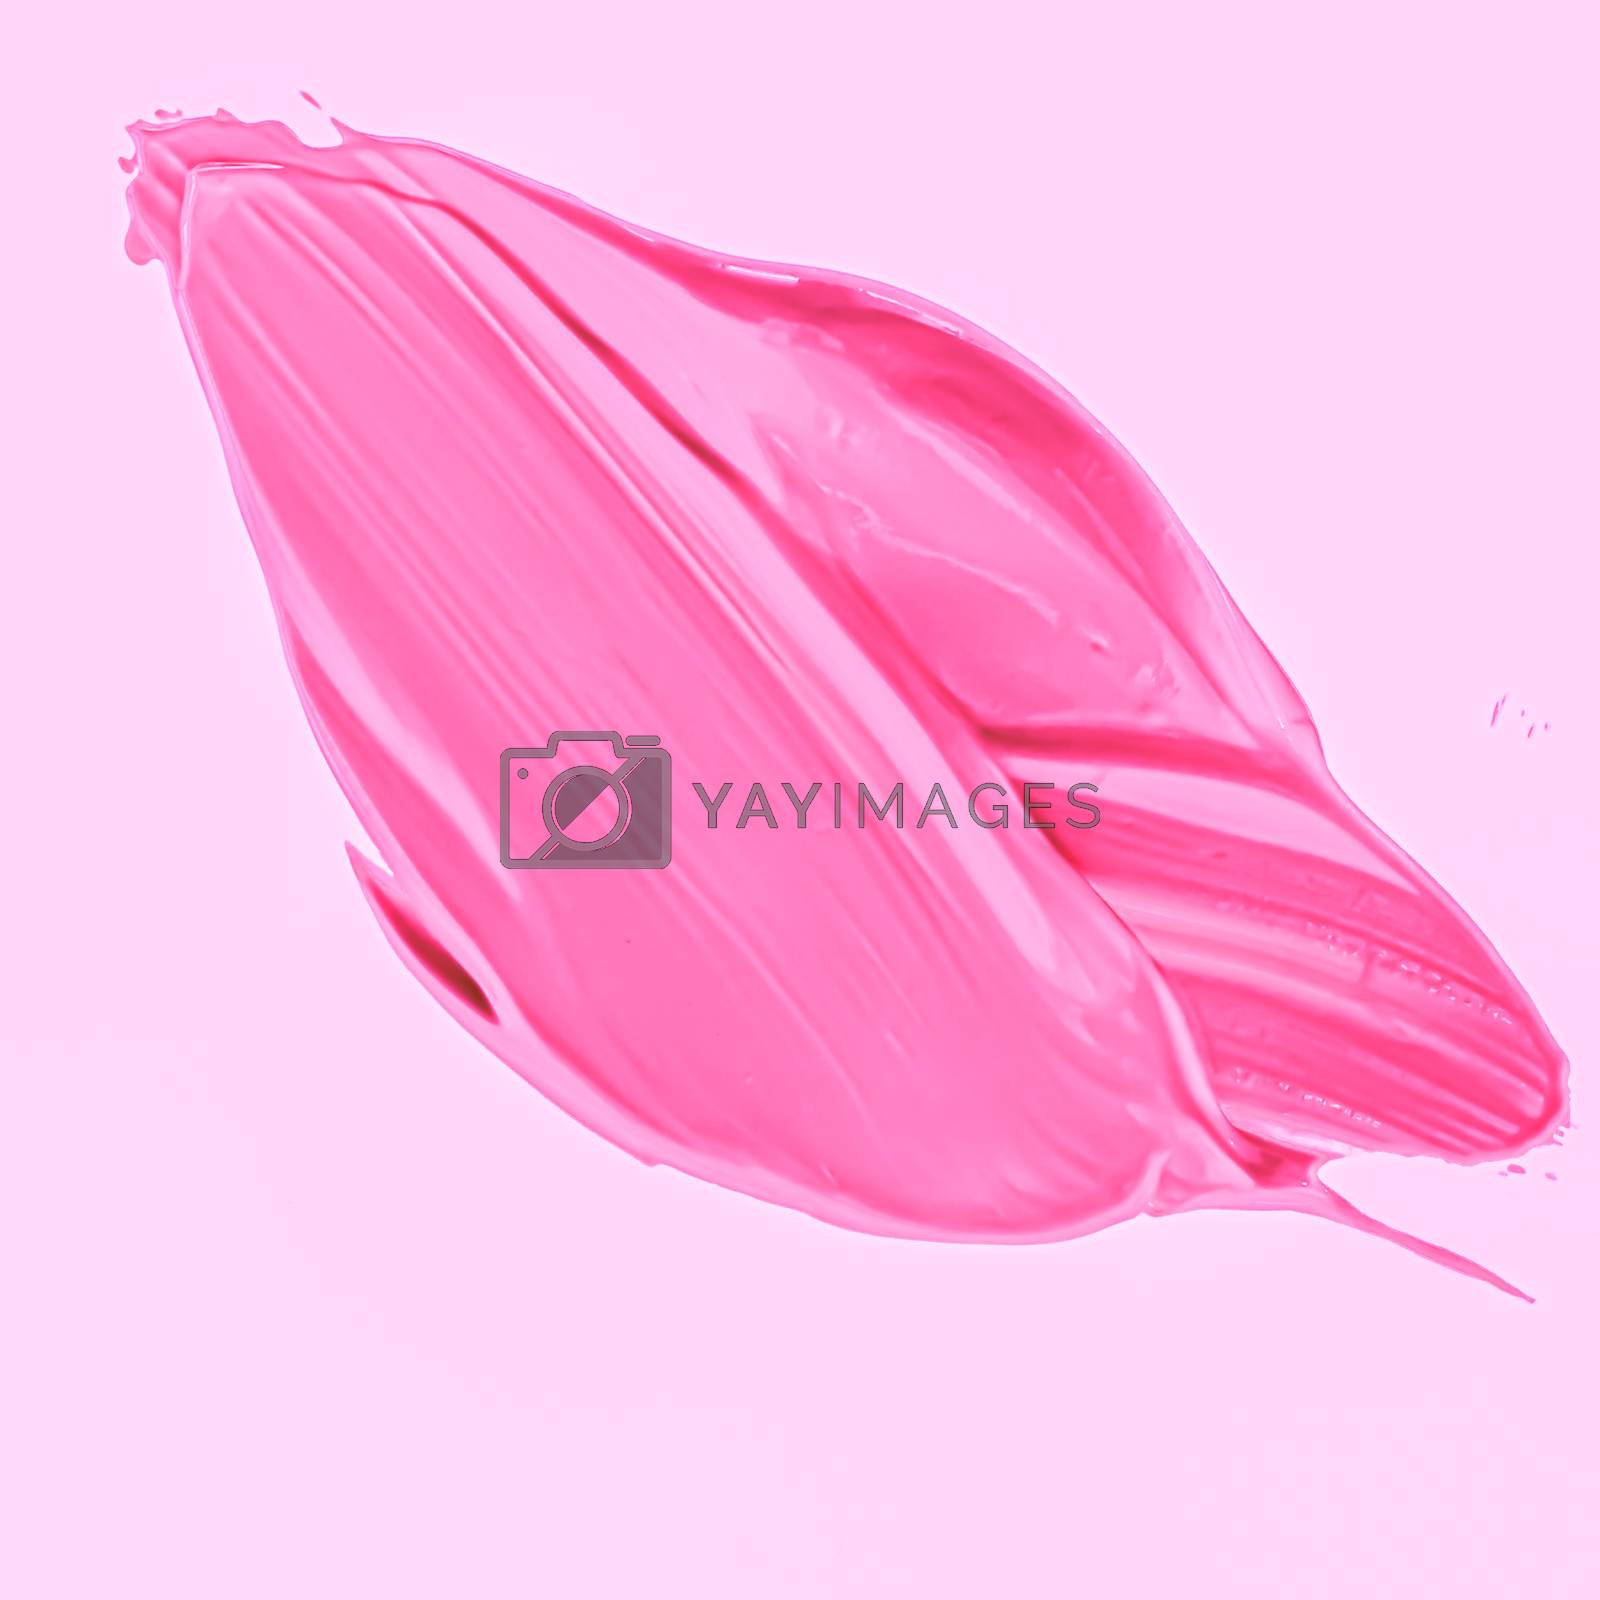 Royalty free image of Pink brush stroke or makeup smudge closeup, beauty cosmetics and by Anneleven